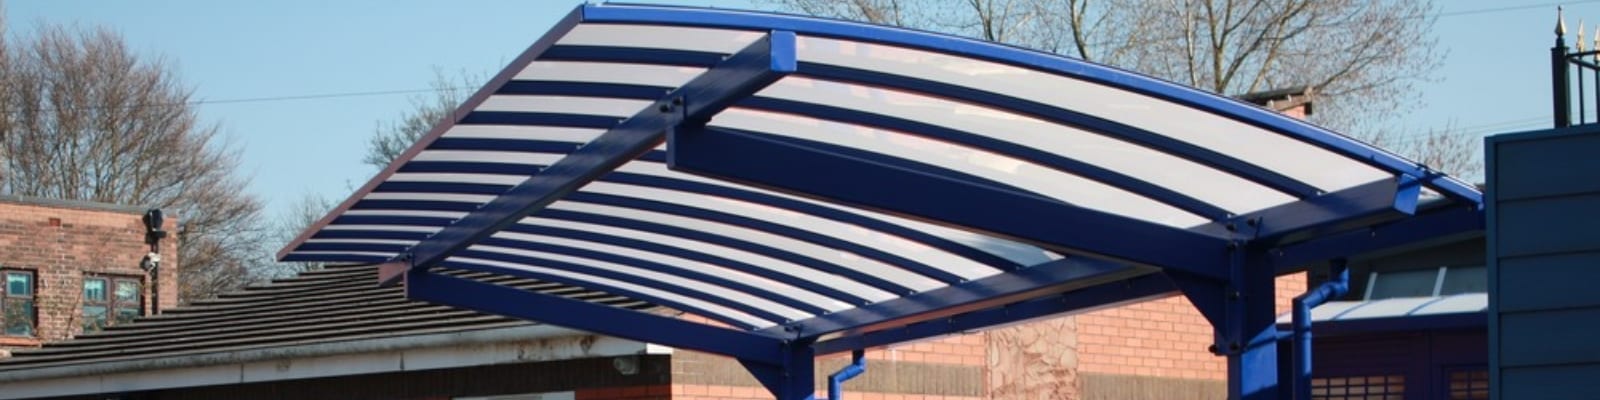 St John's Primary School Cantilever Canopy